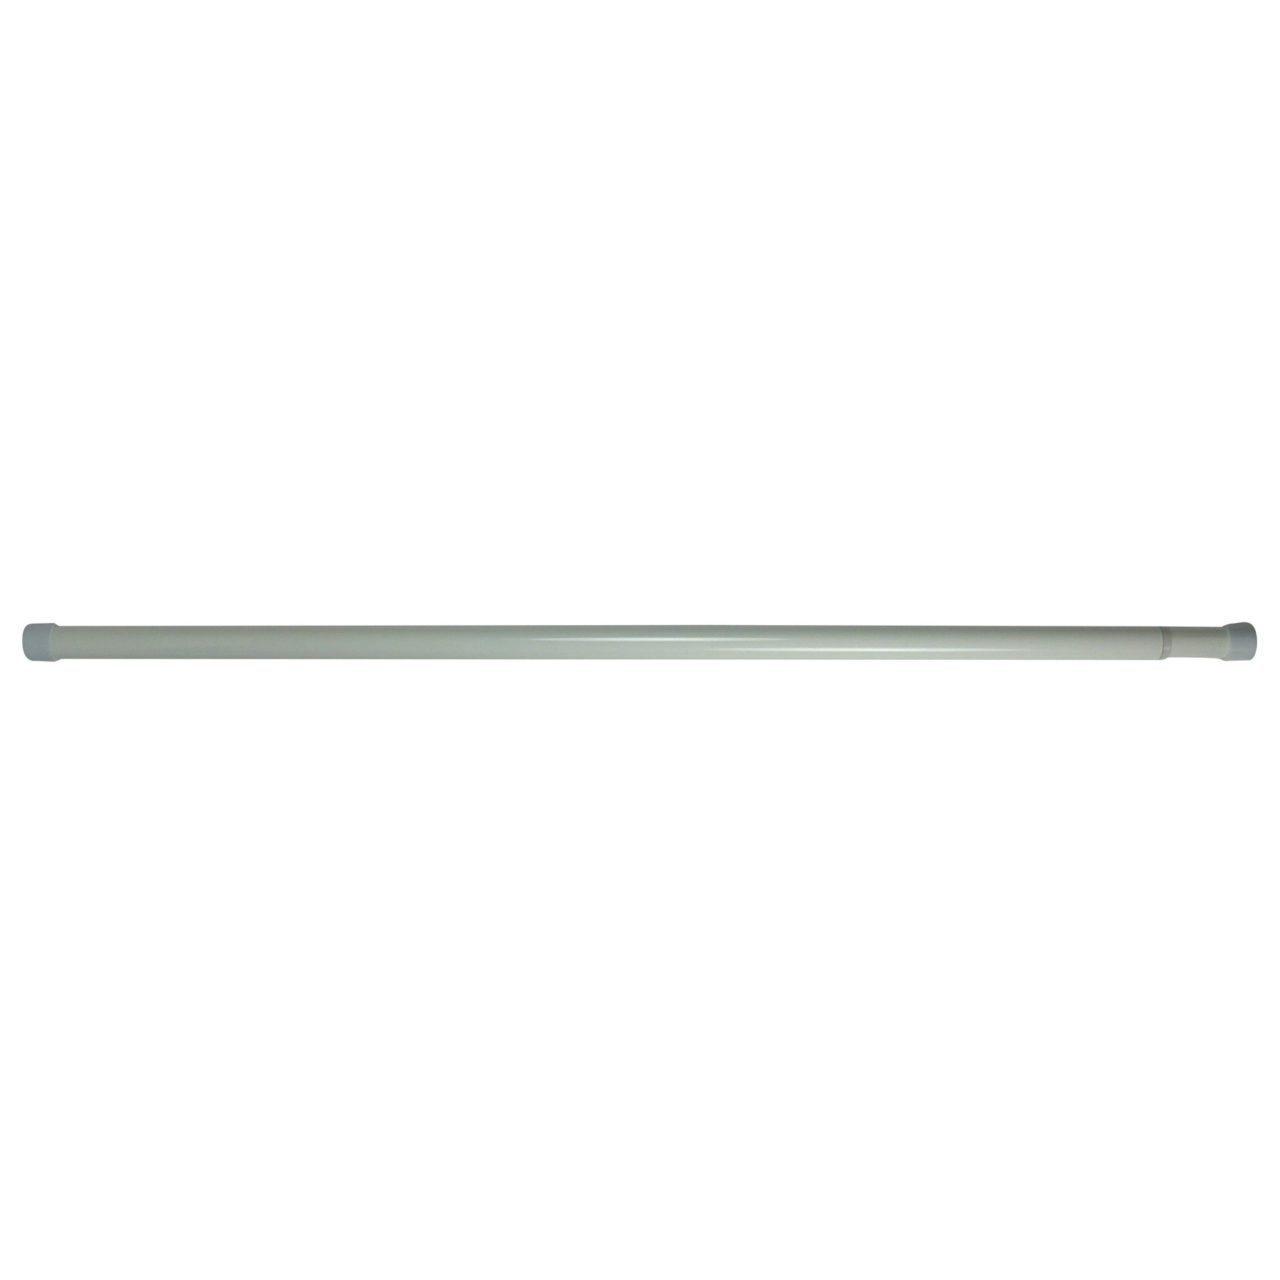 #700-653 - 48" to 72" Extendable "Twist and Lock" Closet Rod main image